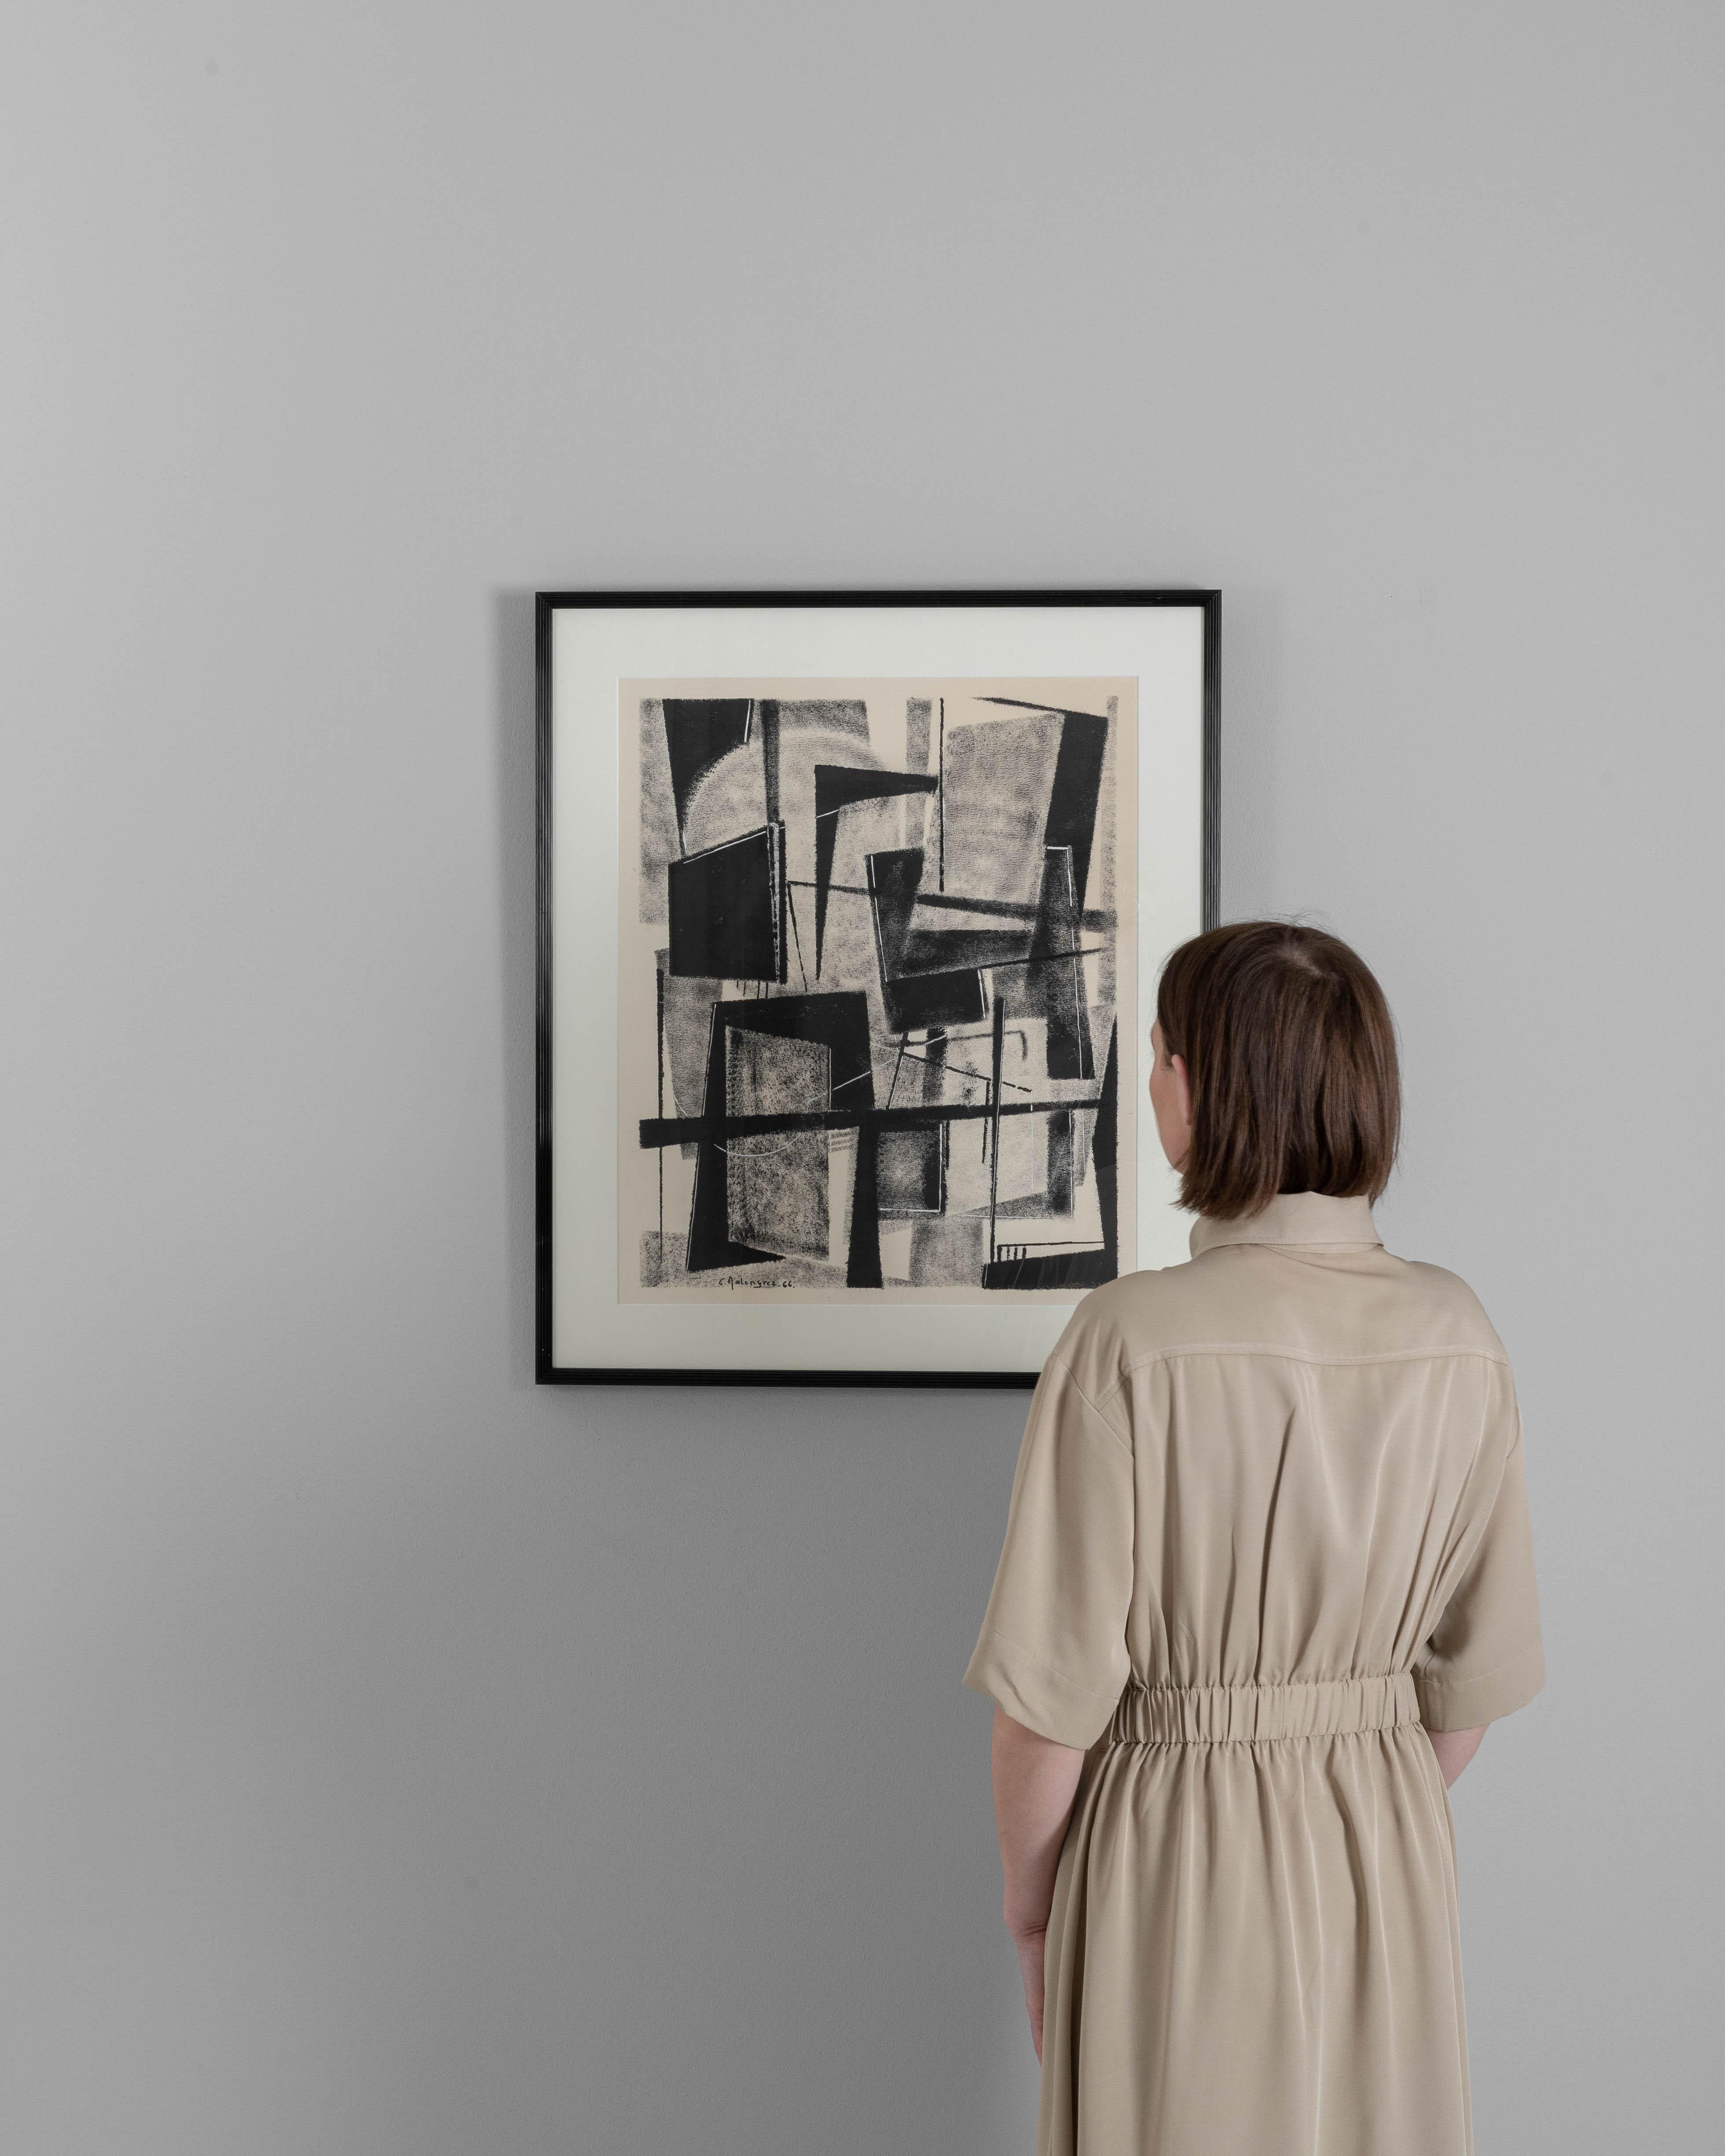 This 20th-century French artwork exudes a geometric abstraction that captures the viewer's eye, masterfully framed in a refined wooden border that enhances its artistic statement. The monochromatic palette is a study in contrast and composition,